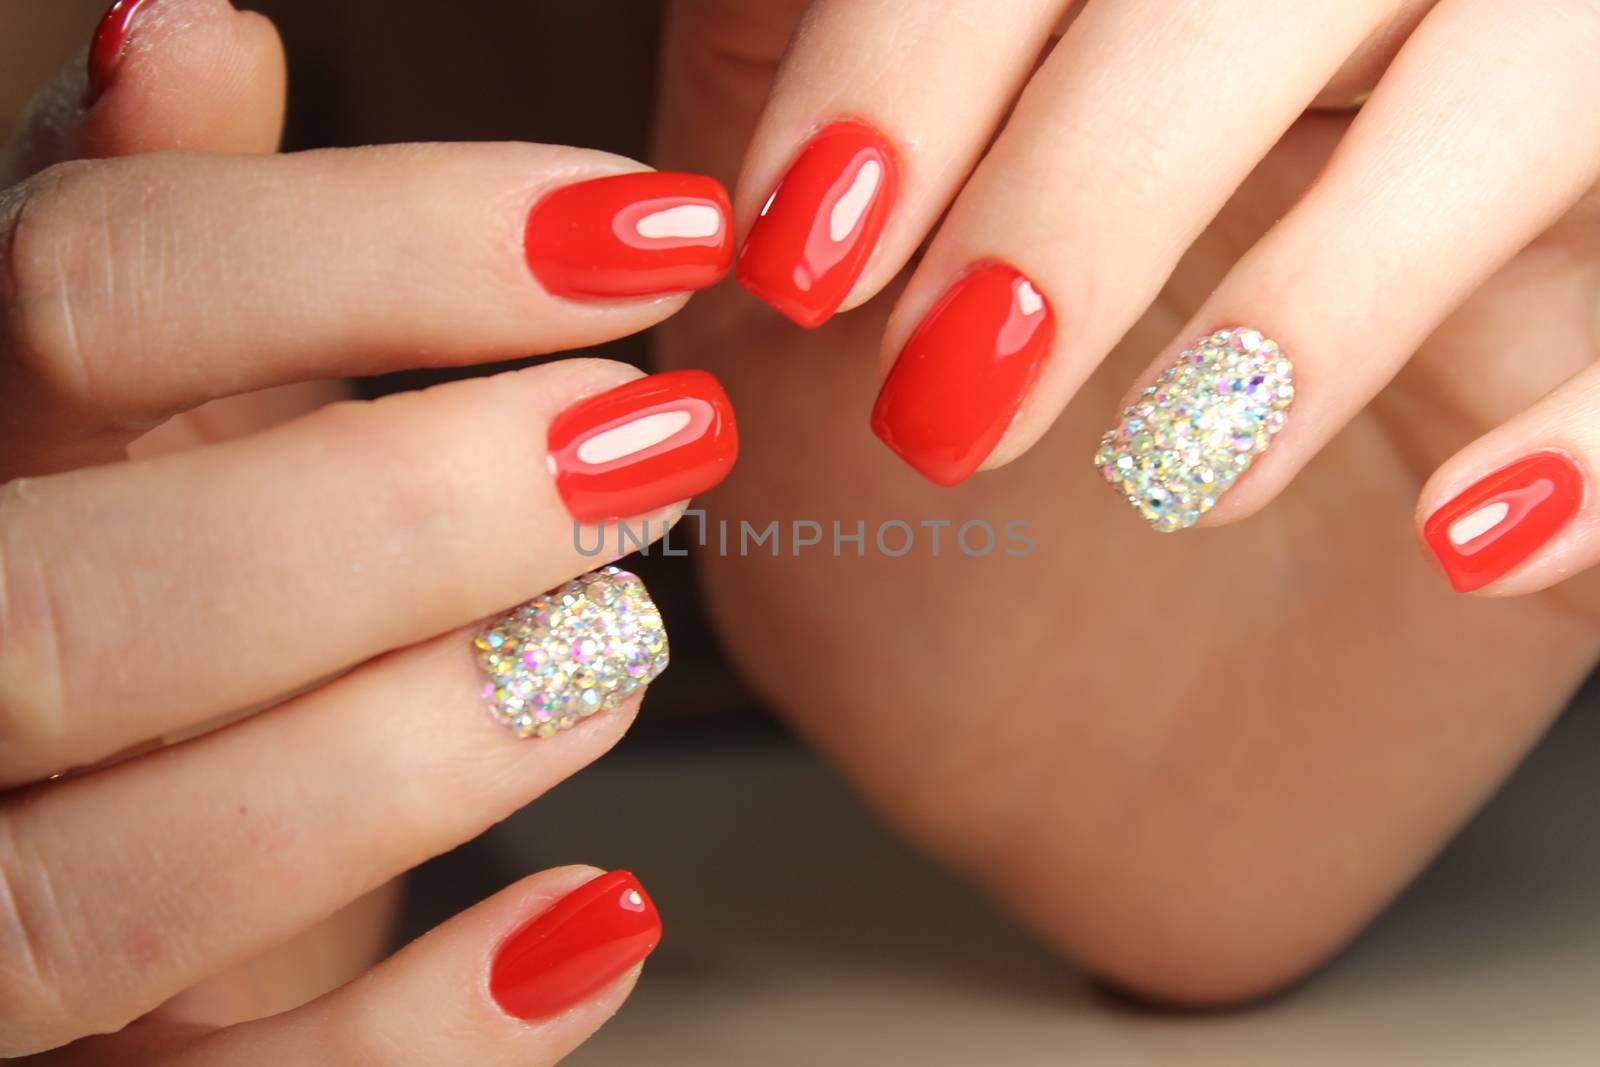 Long beautiful red nails, effective manicure design